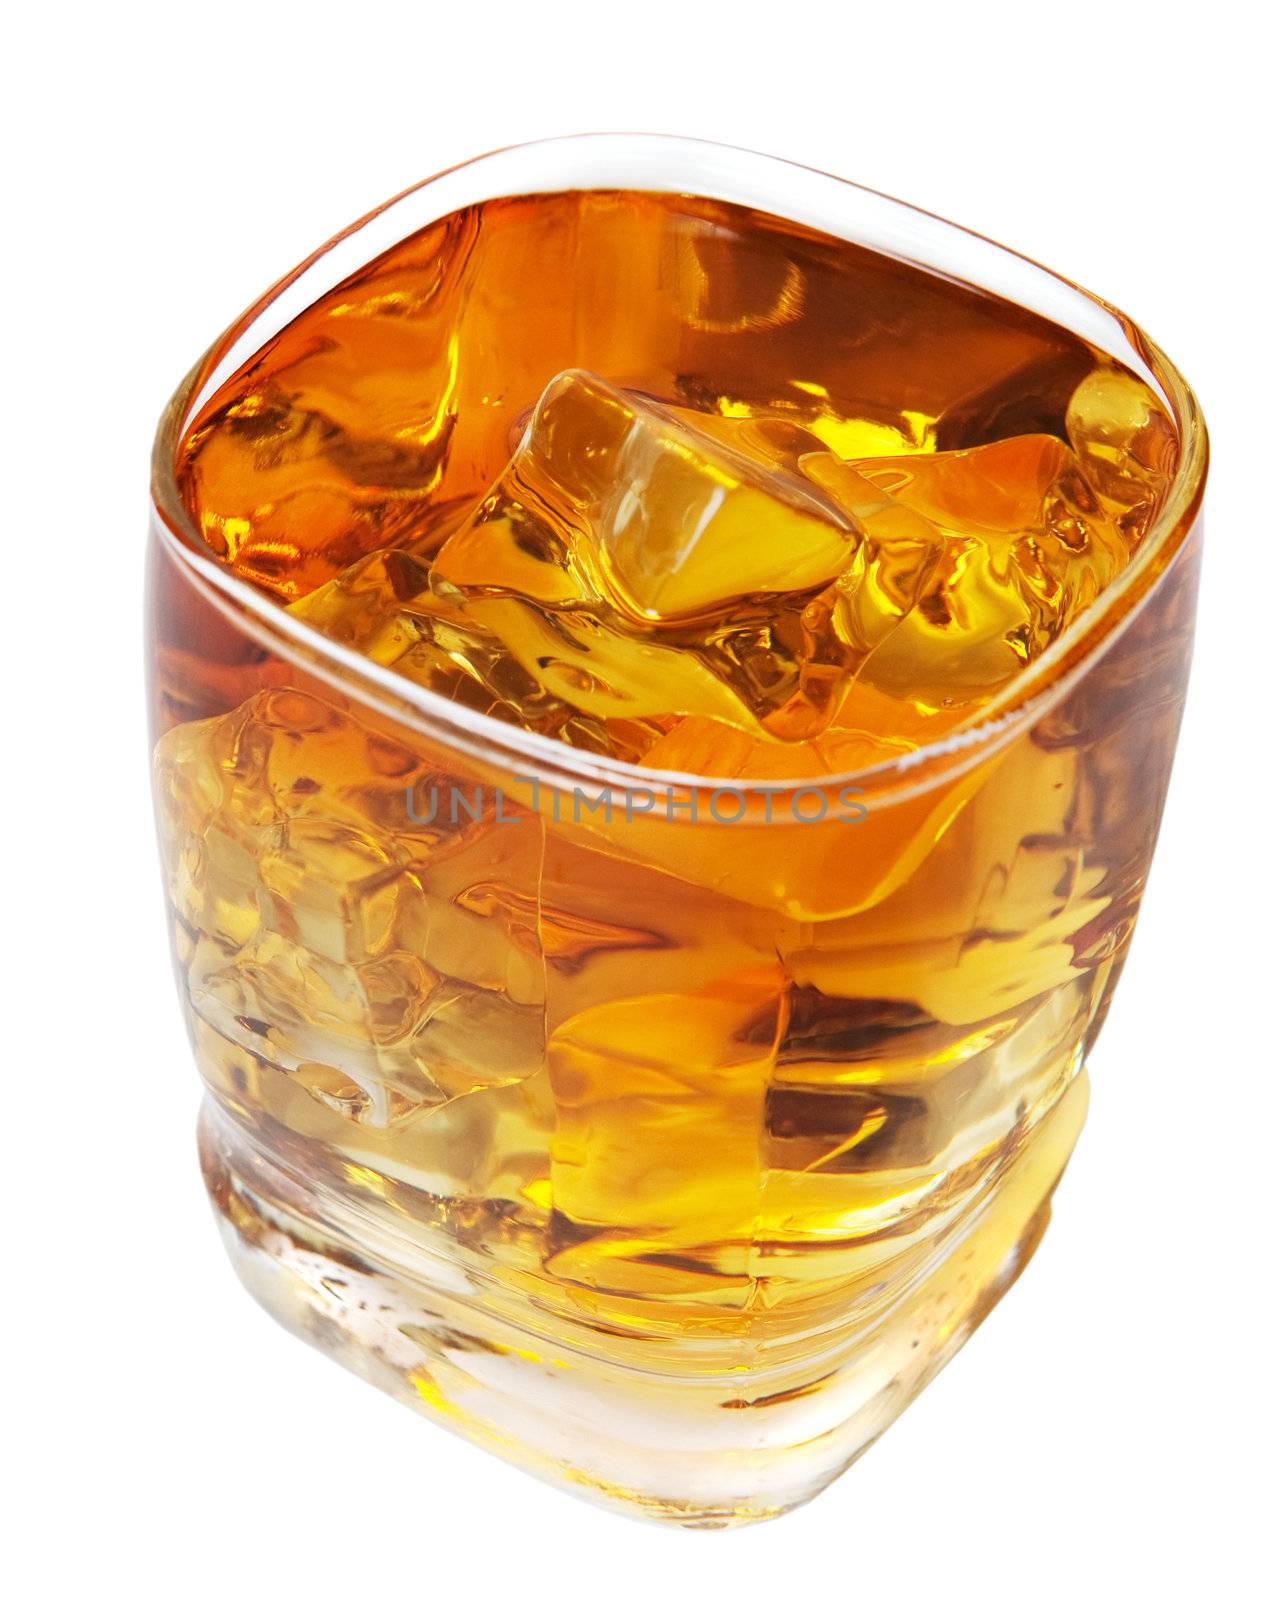 Whiskey on the rocks.  Isolated with clipping path.